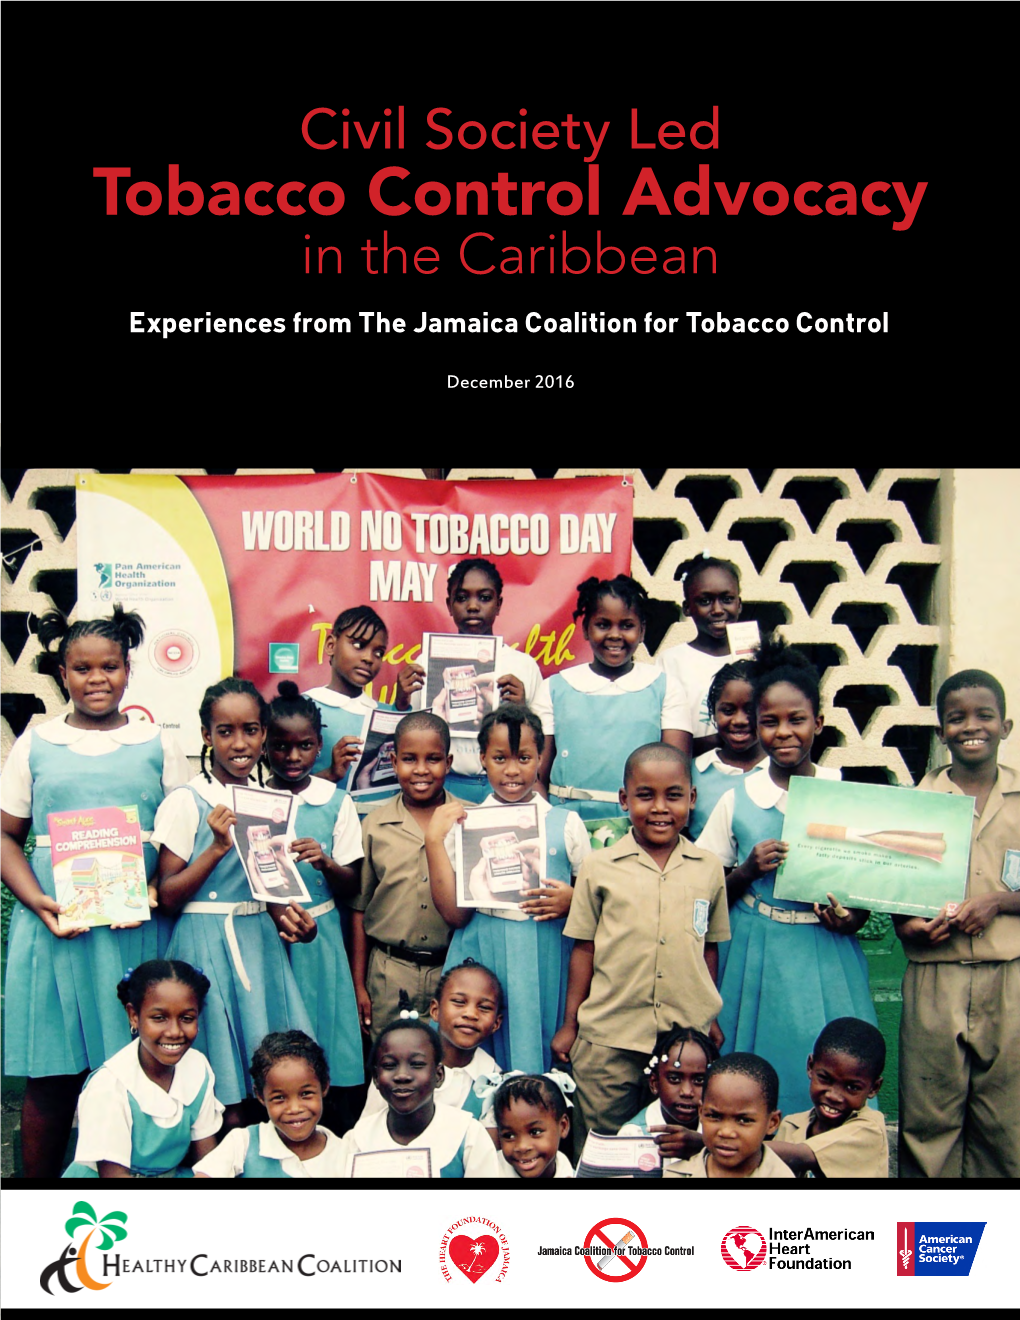 Civil Society Led Tobacco Control Advocacy in the Caribbean Experiences from the Jamaica Coalition for Tobacco Control